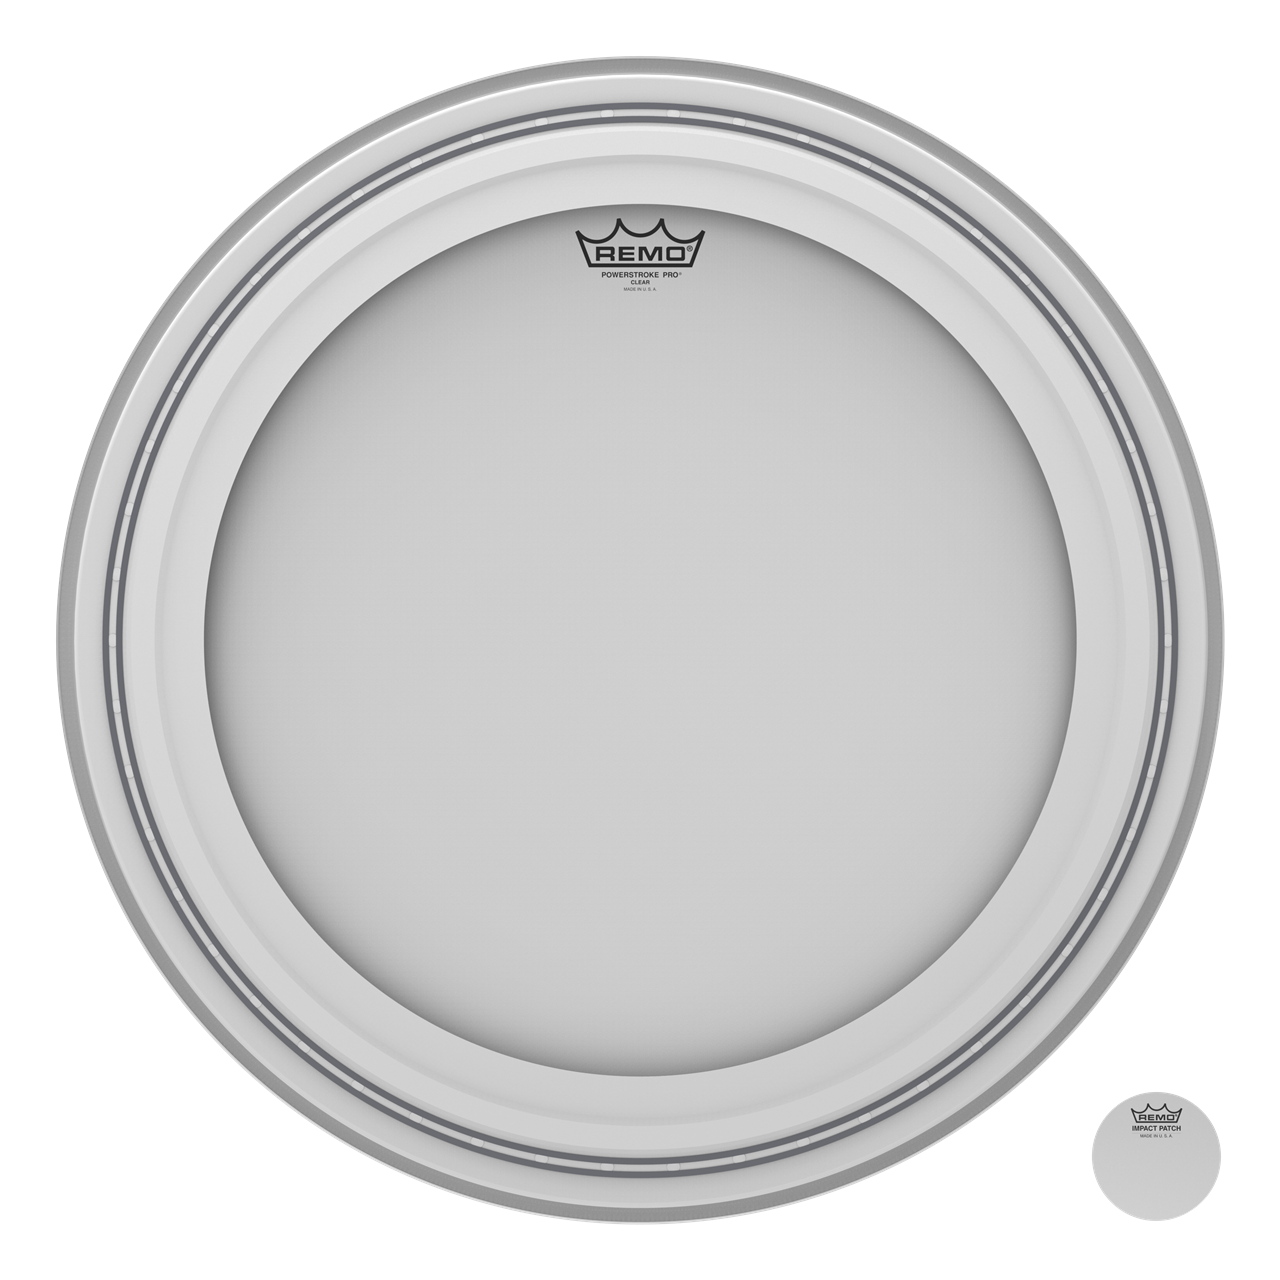 Remo PR-1118-00 Powerstroke Pro, Coated 18" Bass Drum Fell